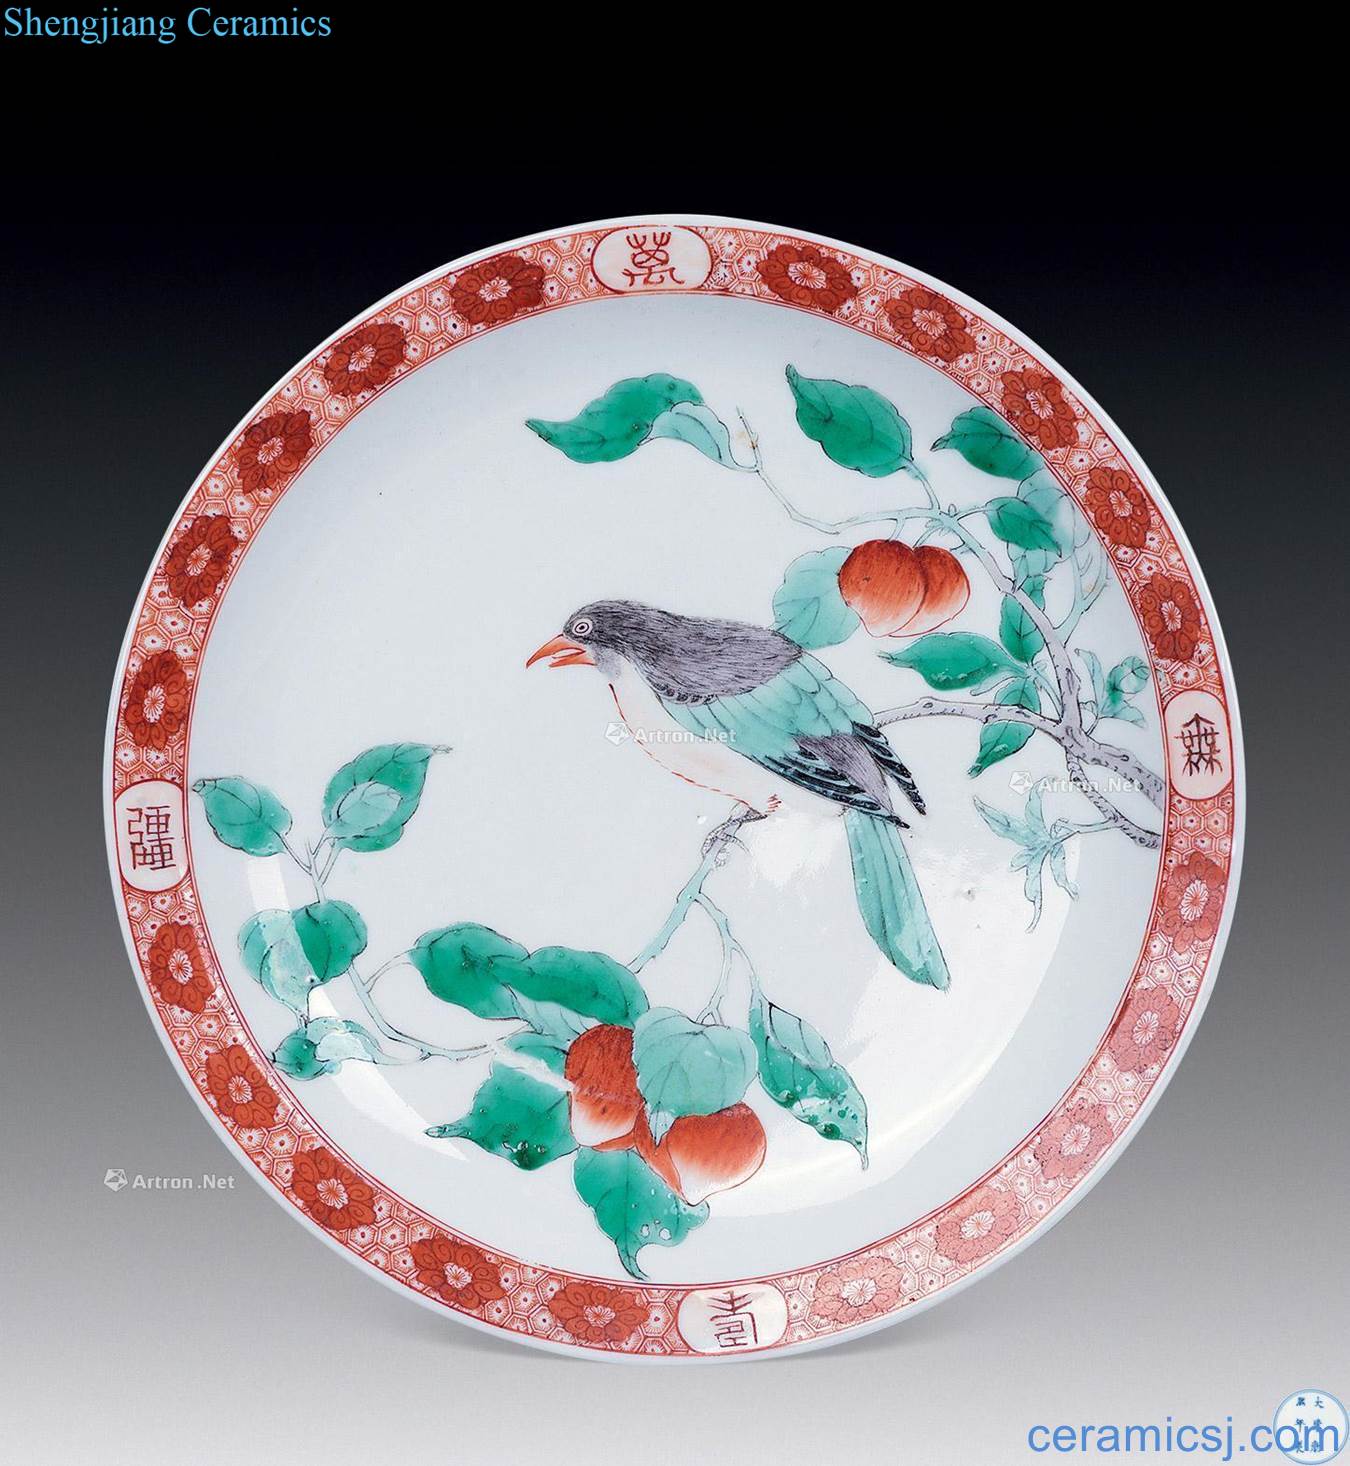 "Stays in the qing emperor kangxi colorful flowers and birds